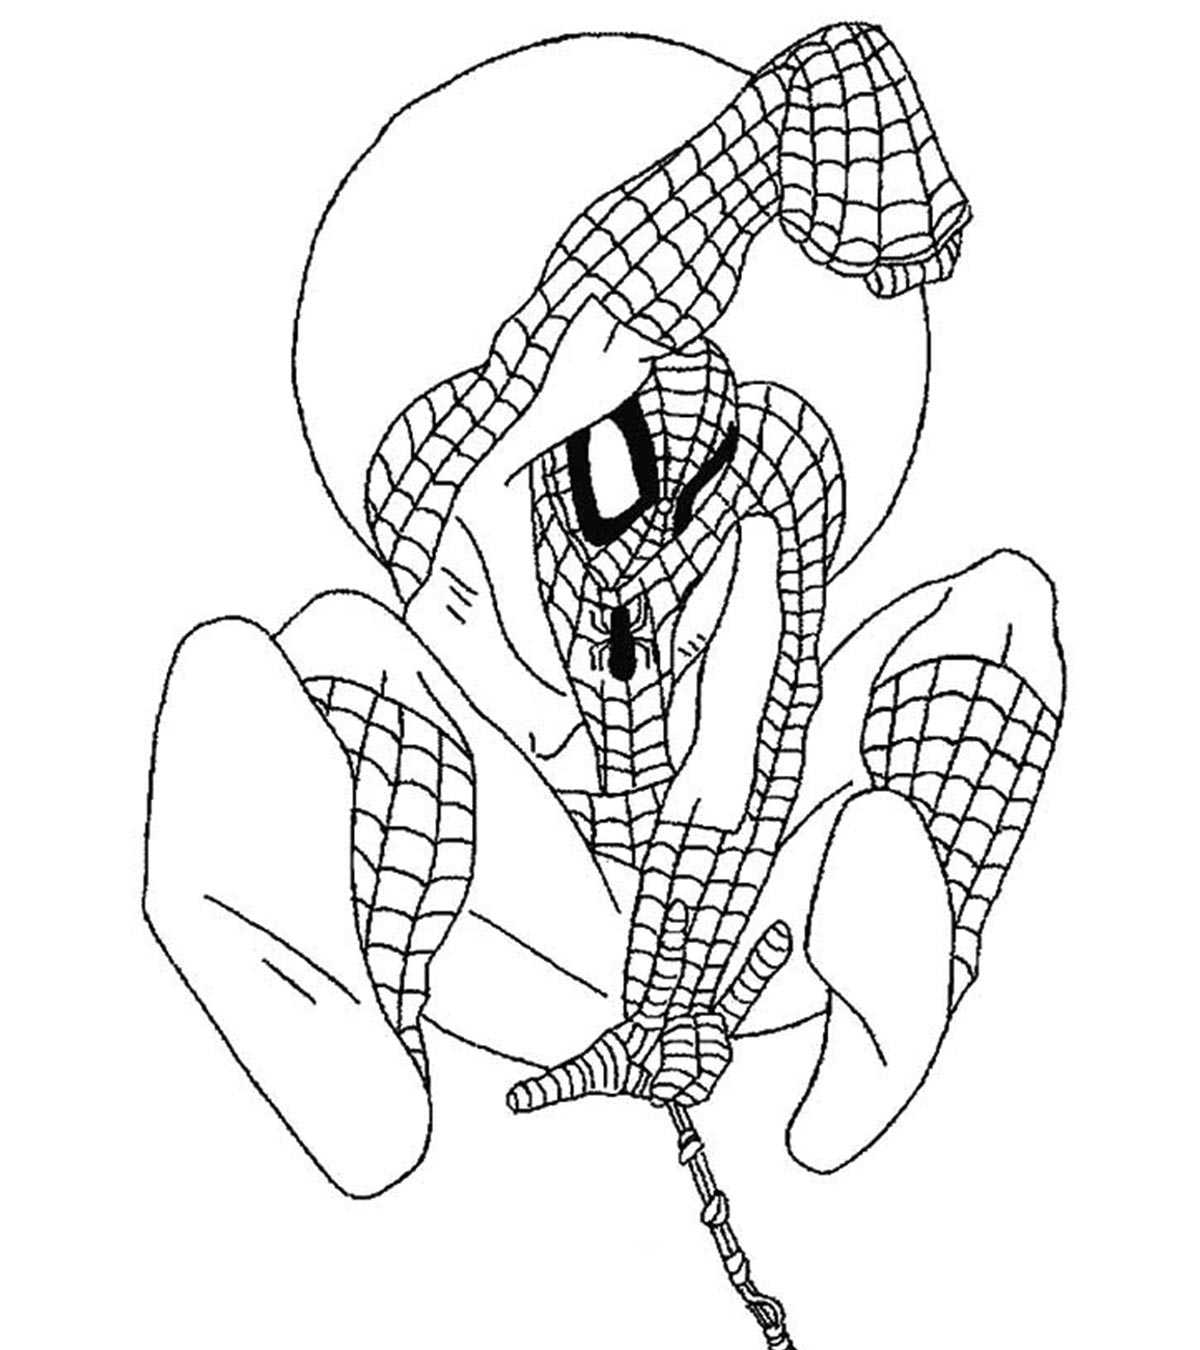 Super Heros Coloring Pages - MomJunction